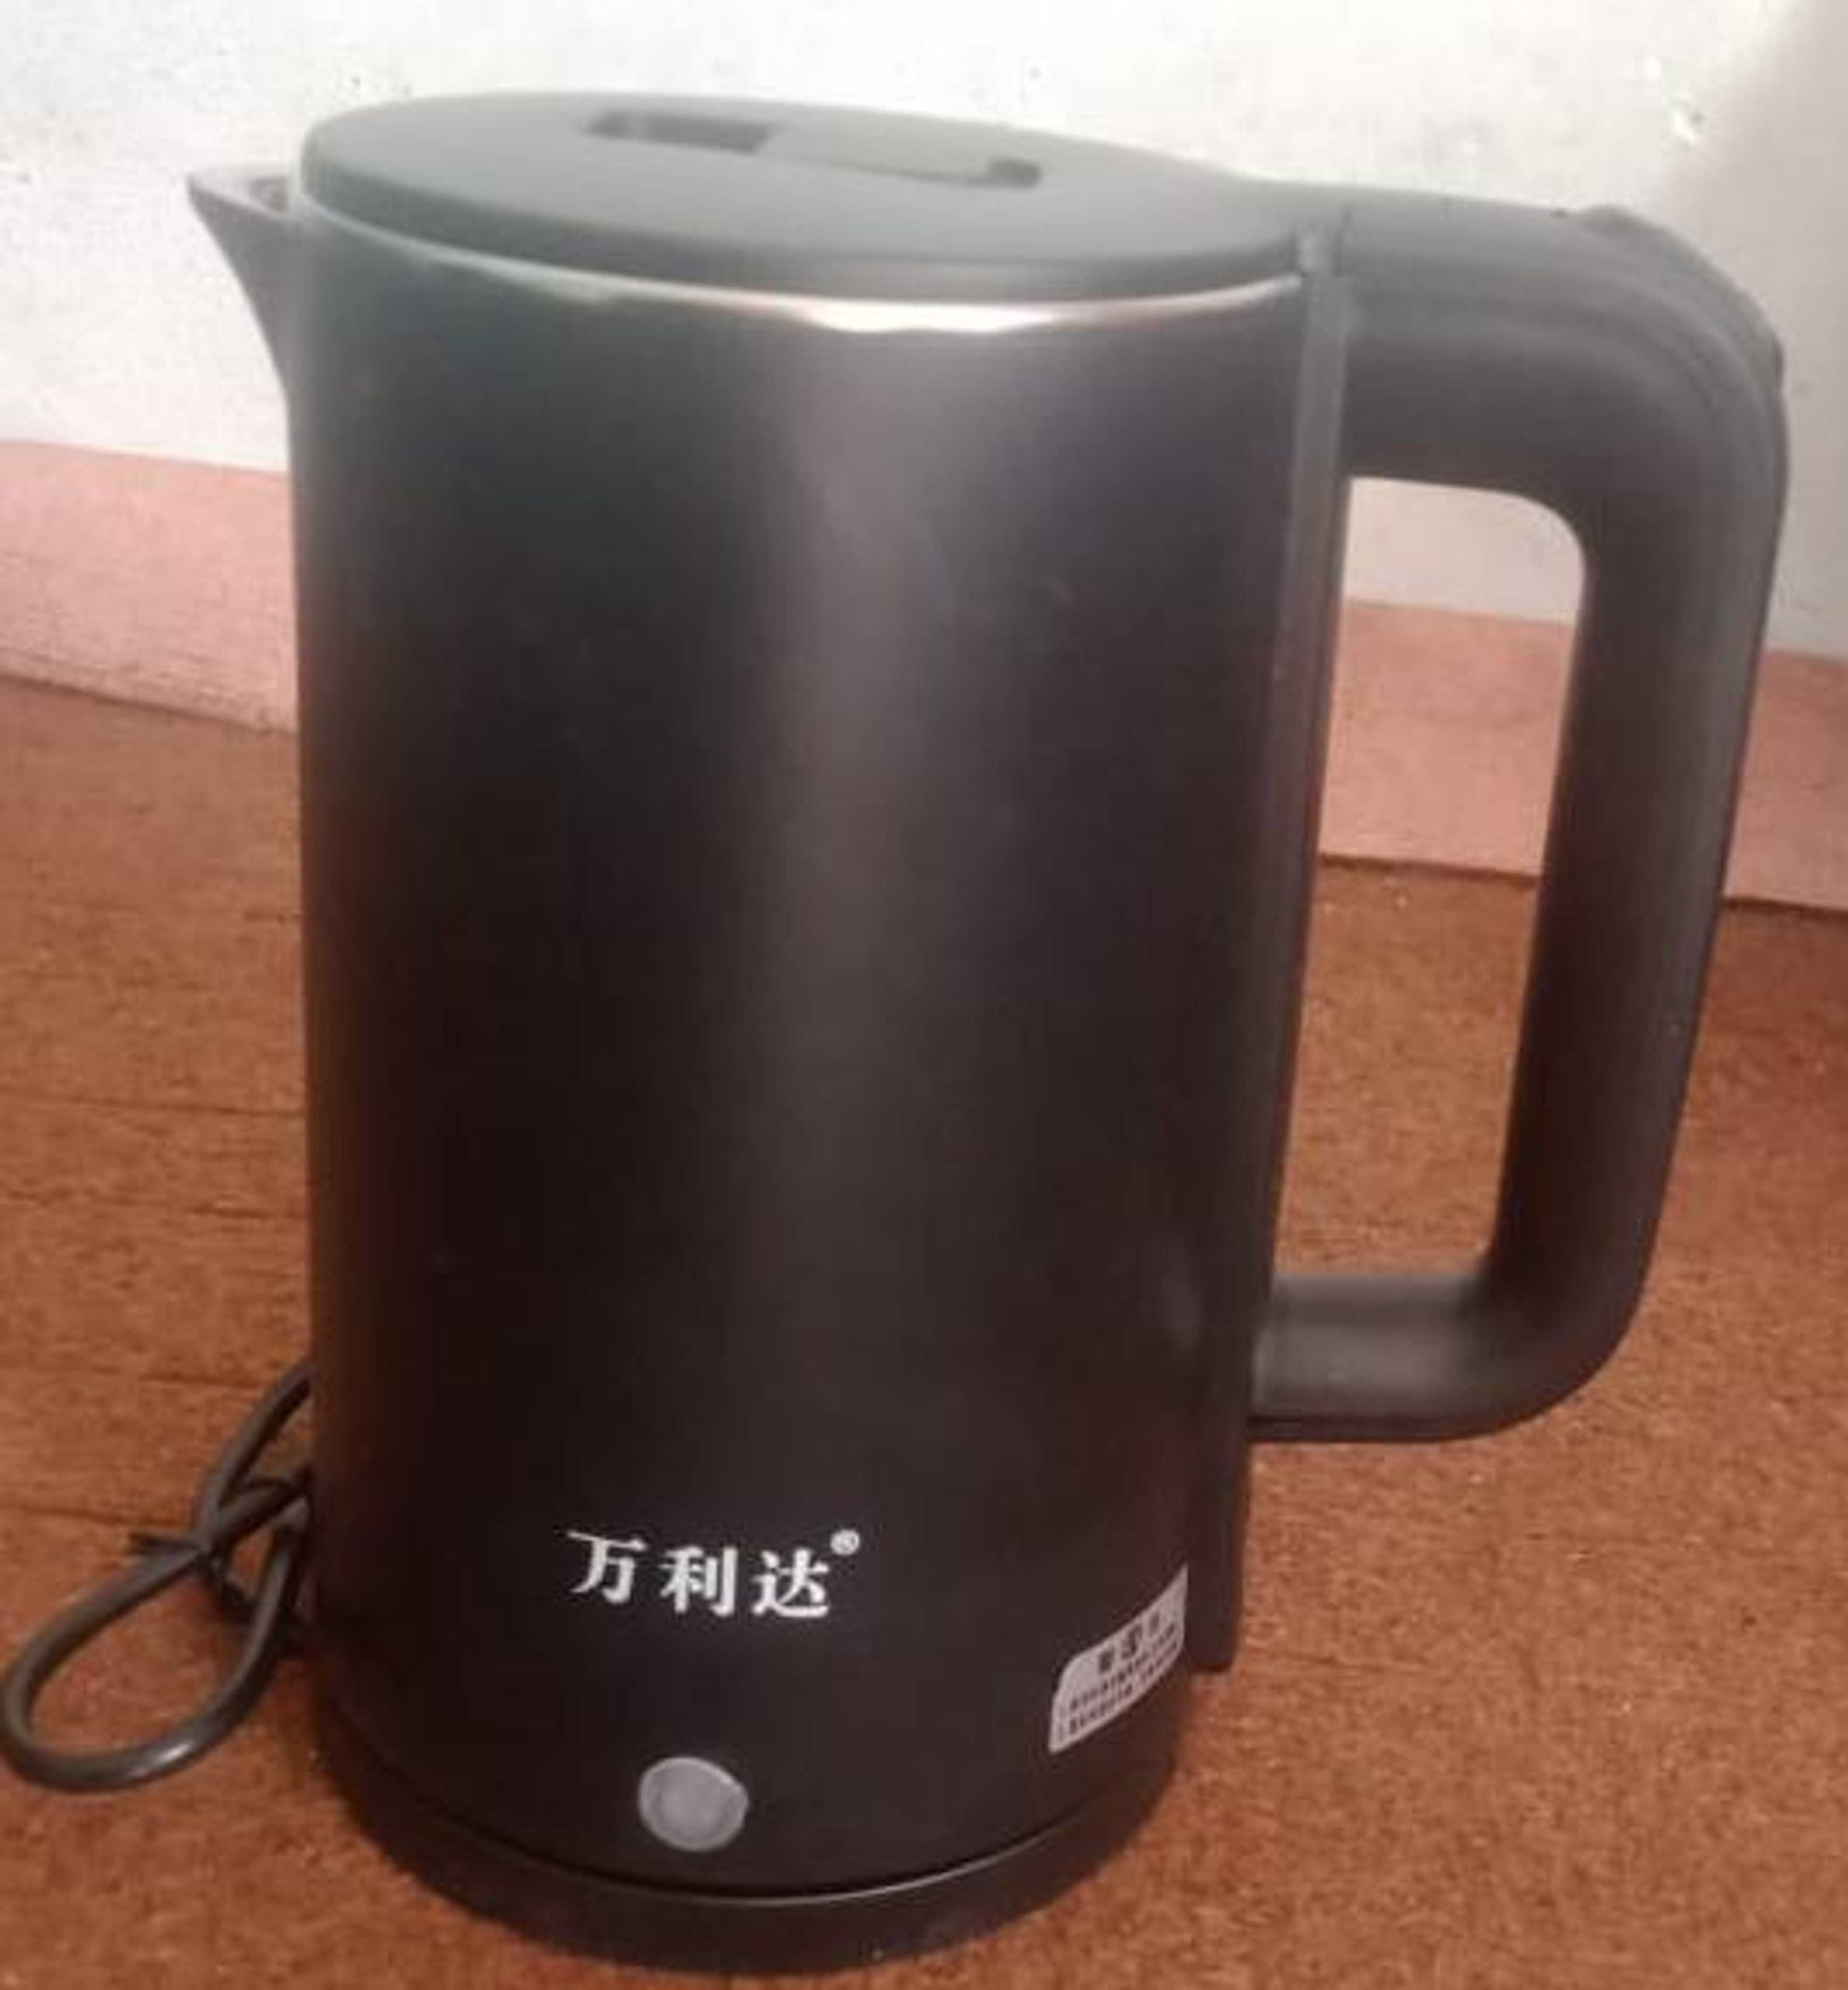 Electric Kitchen Hot Water Kettle Appliances Premium Series 2.3L Stainless Steel Electric Automatic Cut Off Jug Kettle